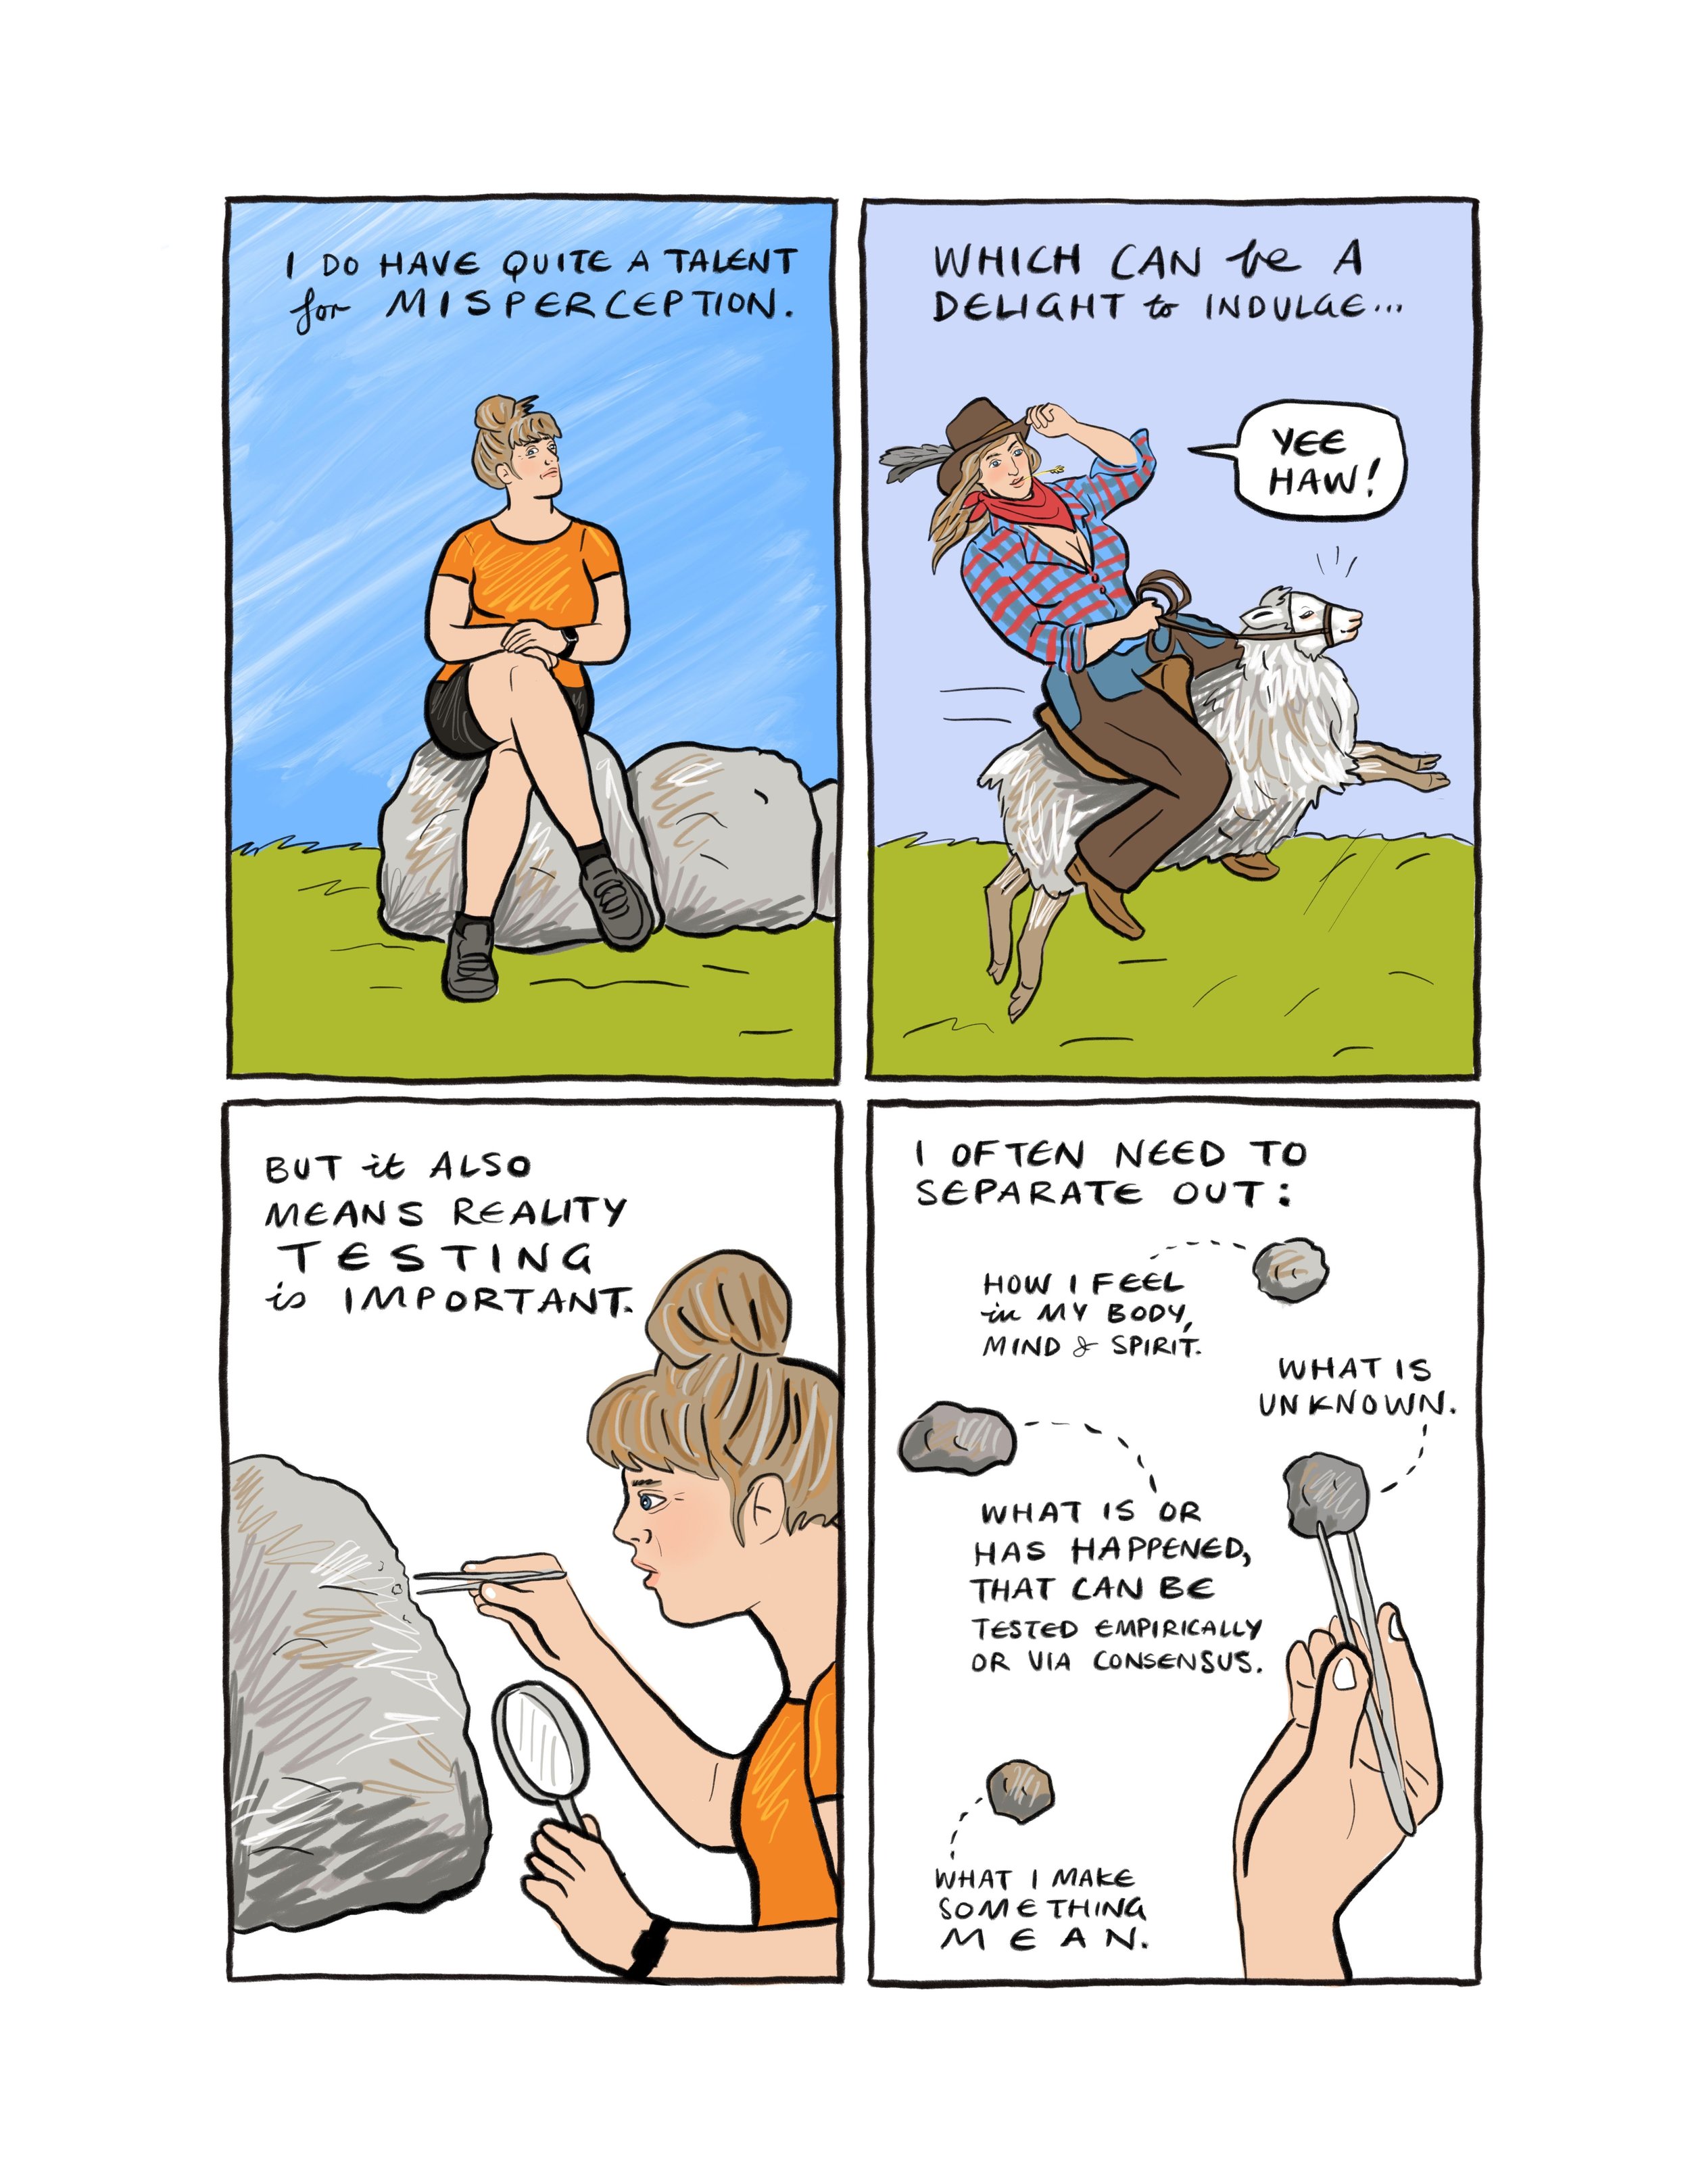 Image 1: She sits on the rock, while the words say "I have quite a talent for misconception." Image 2: She rides a sheep, wearing a cowgirl outfit, saying "yeehaw", and the text says "which can be a delight to indulge". Image 3: She holds tweezers close to one of the rocks, looking closely.  Copy says: "But it also means reality testing is important". Image 4: Tweezer holds one small rock, surrounded by others. Copy says: I often need to seprate out: How I feel in my body, mind and spirit. What is unknown.  What is or has happened that can be tested empircally or via consensus. What I make something mean. 